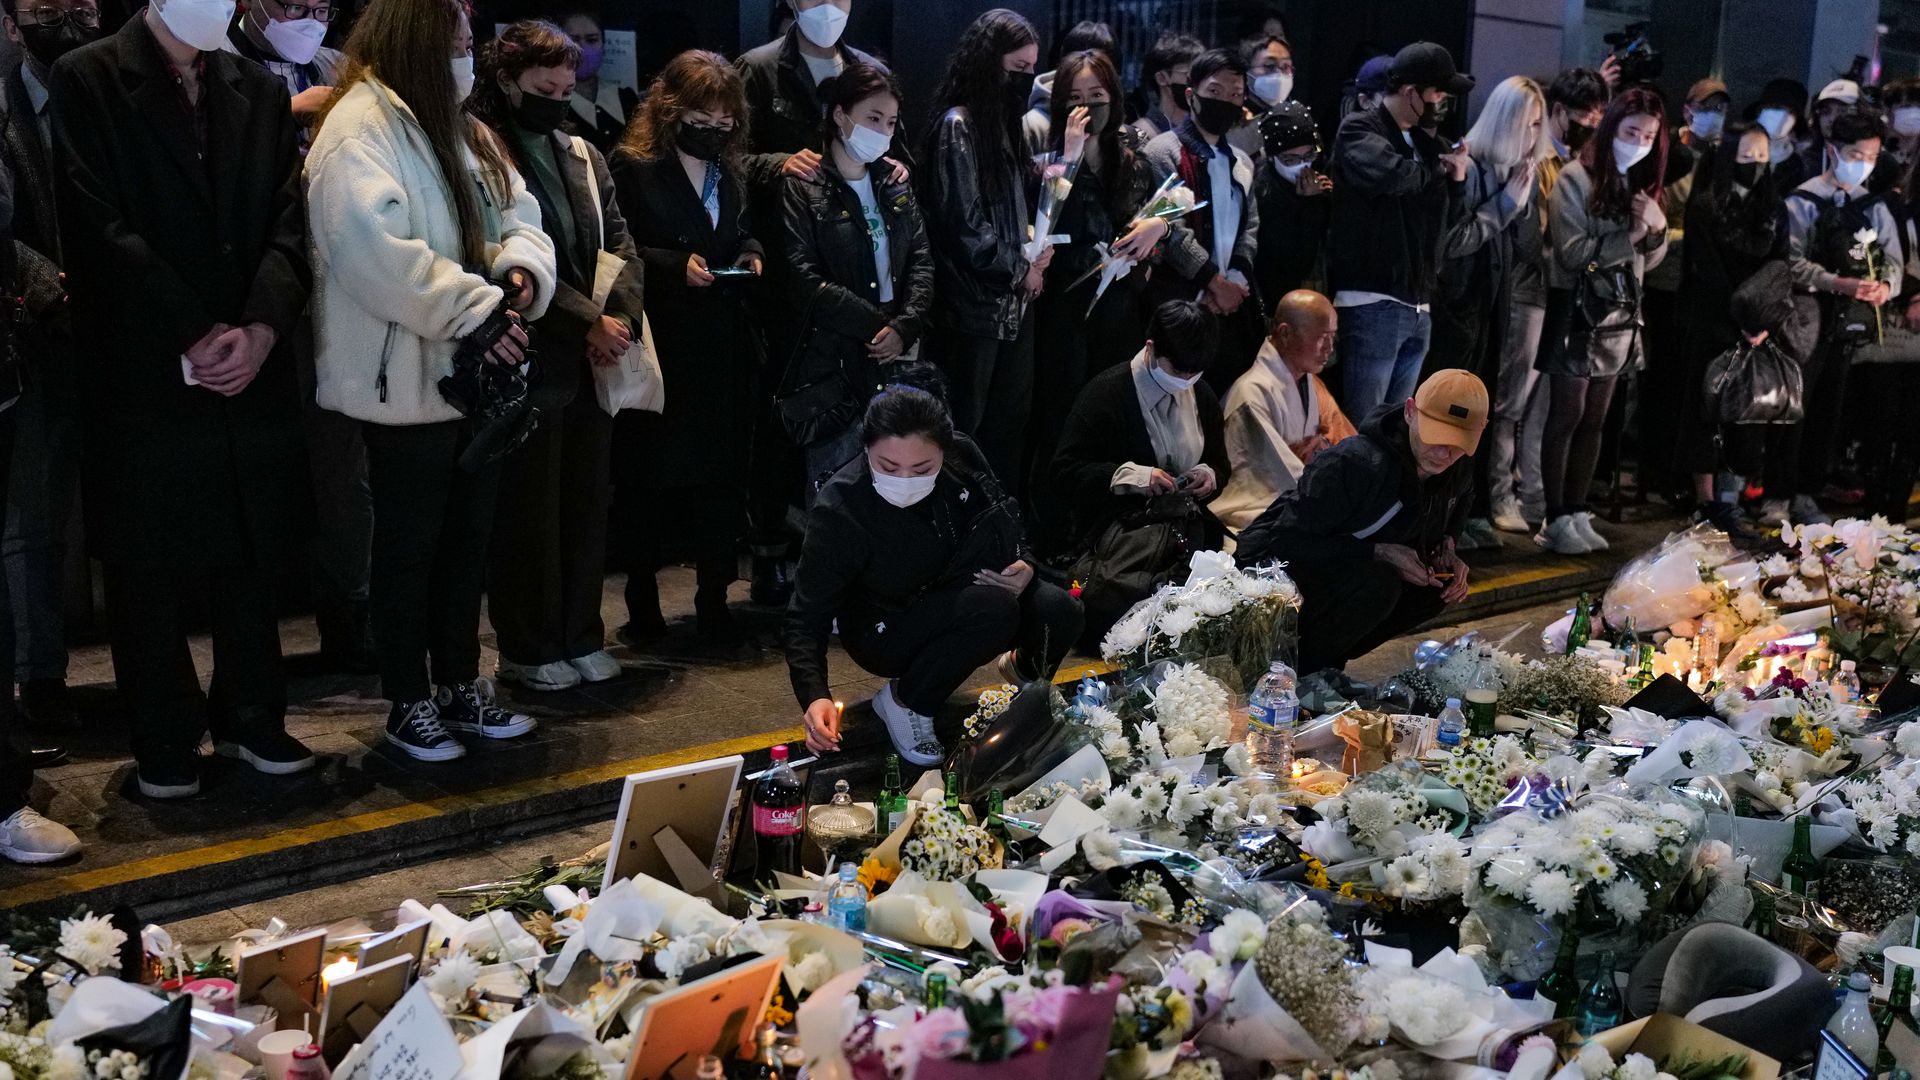 People pay tribute for the victims of the Halloween disasters in Itaewon on October 31, 2022 in Seoul, South Korea